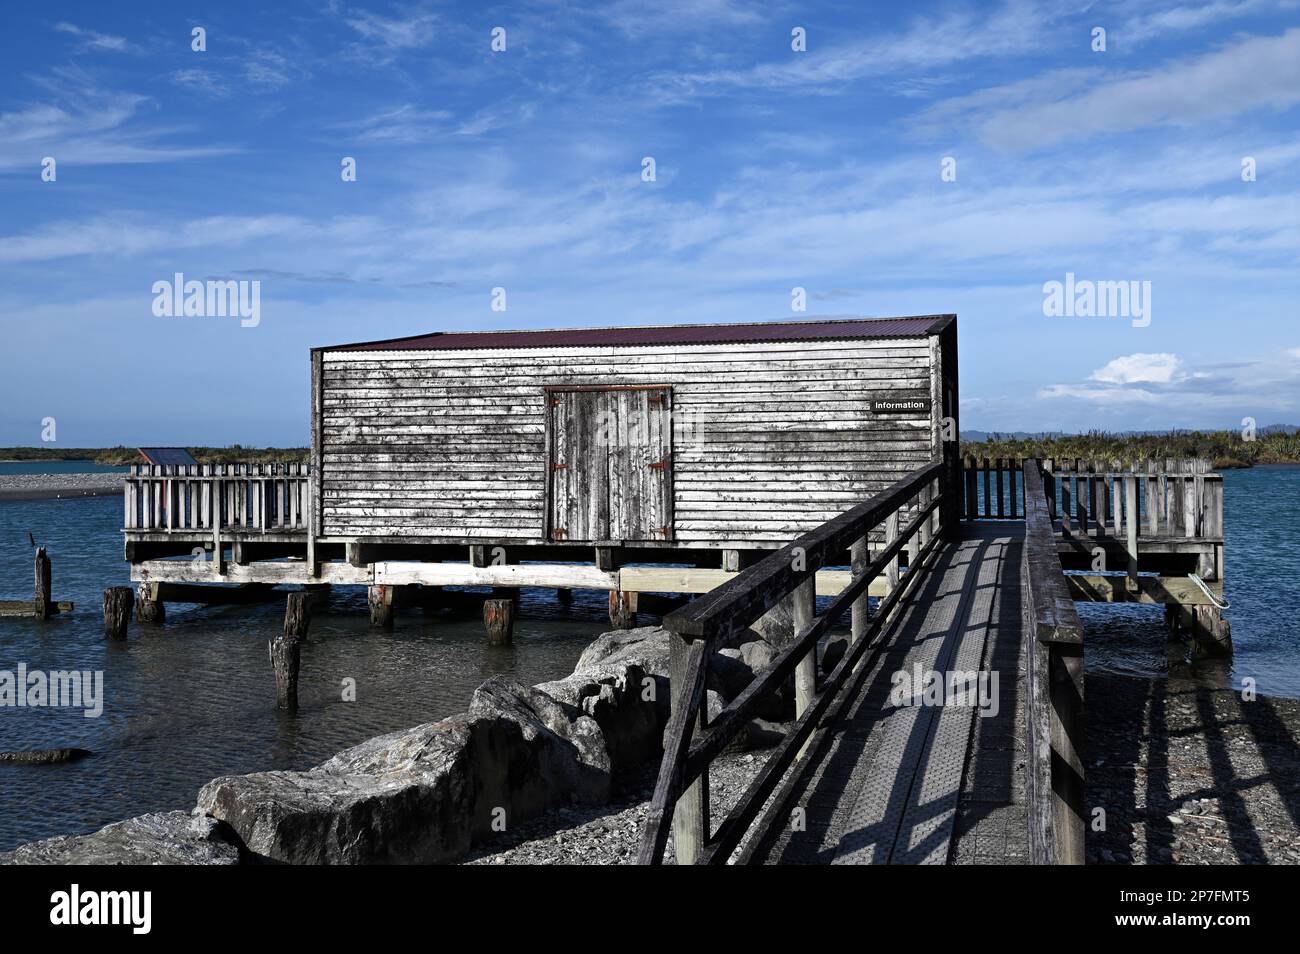 The wharf, jetty and boat house at the West Coast settlement of Okarito. During the 1860s gold rush Okarito saw 500 plus miners disembark in one day. Stock Photo